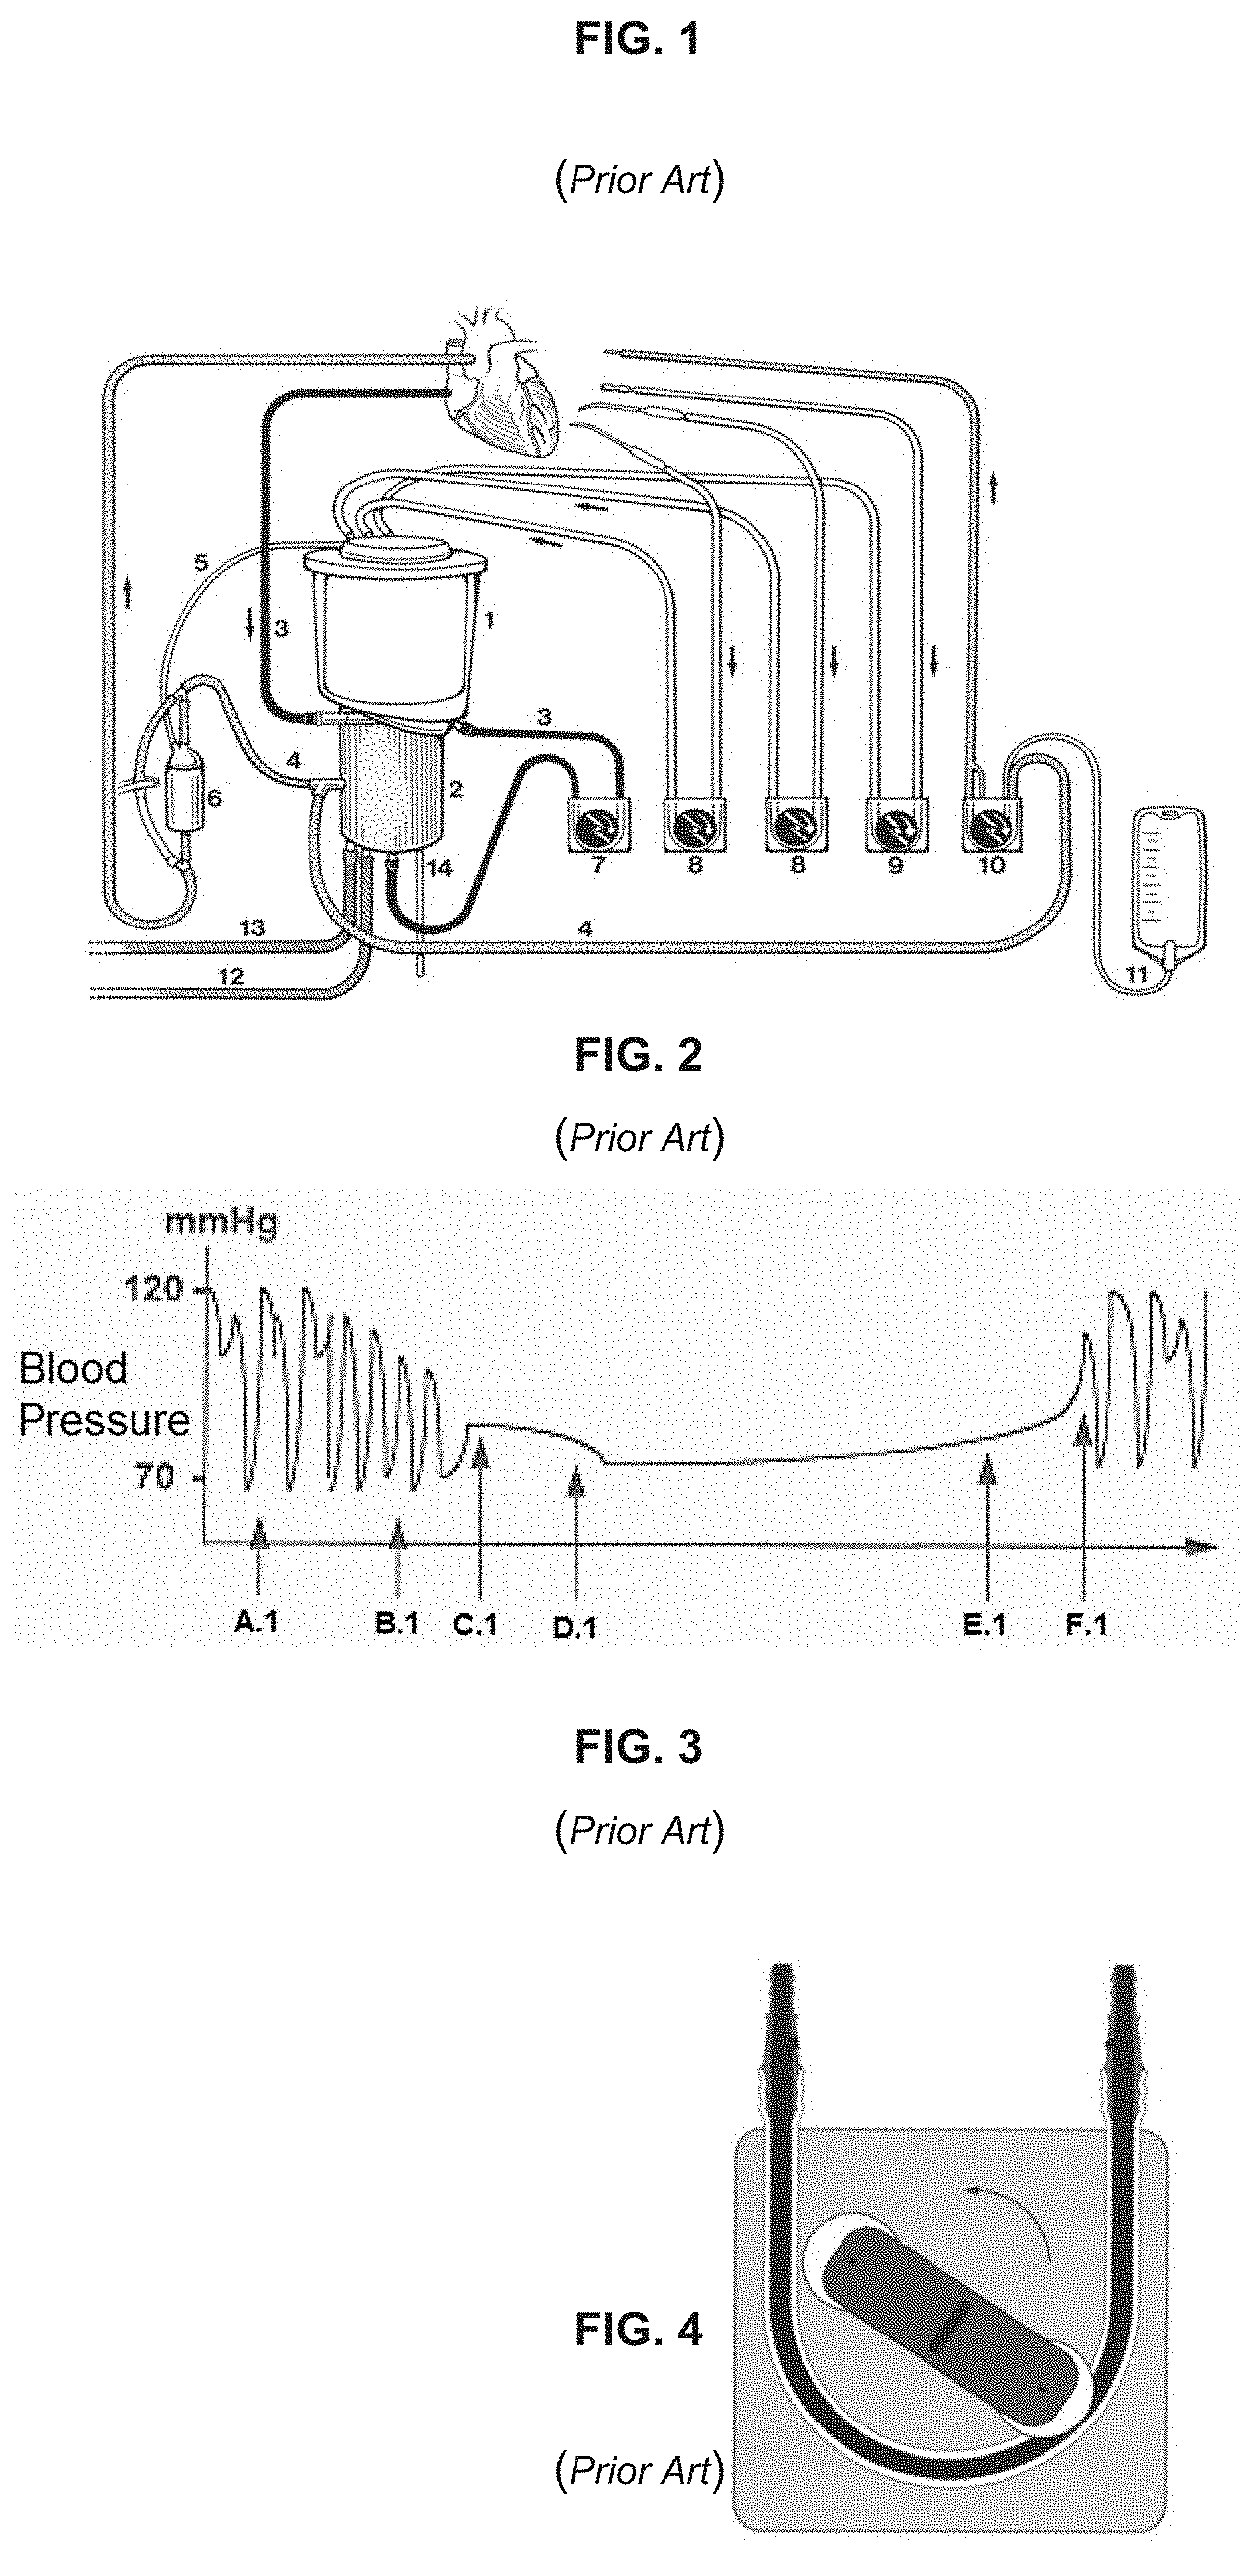 Pump for artificial circulatory assistance and a pumping system